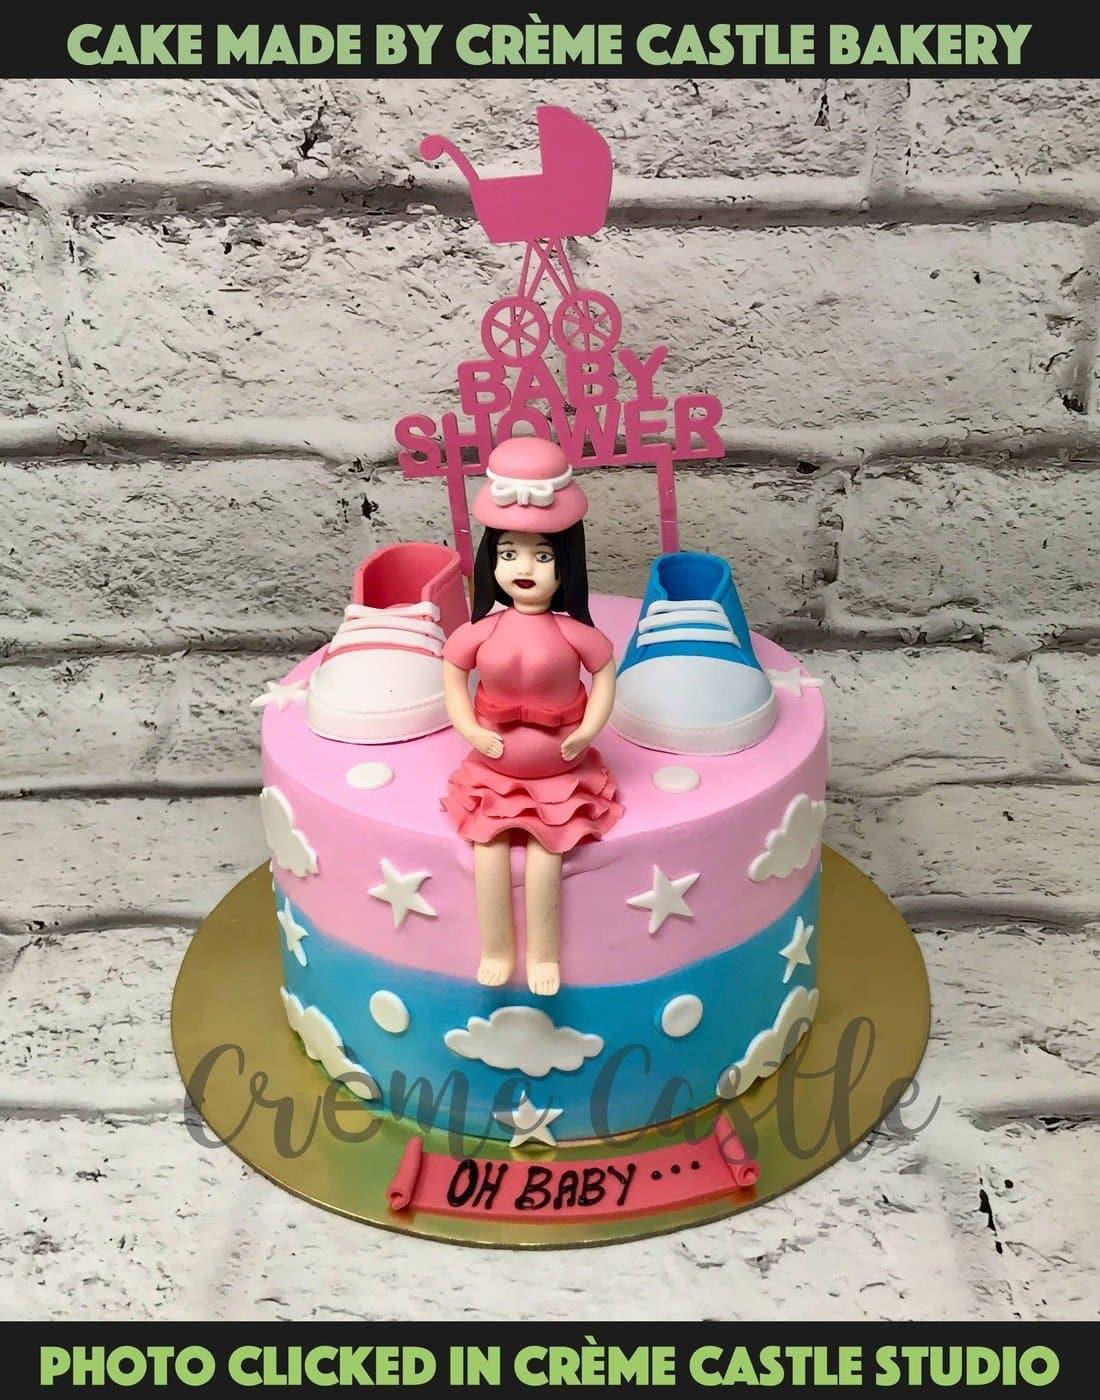 Veena's Art of Cakes: Birthday cake with Pregnant woman sugar figure